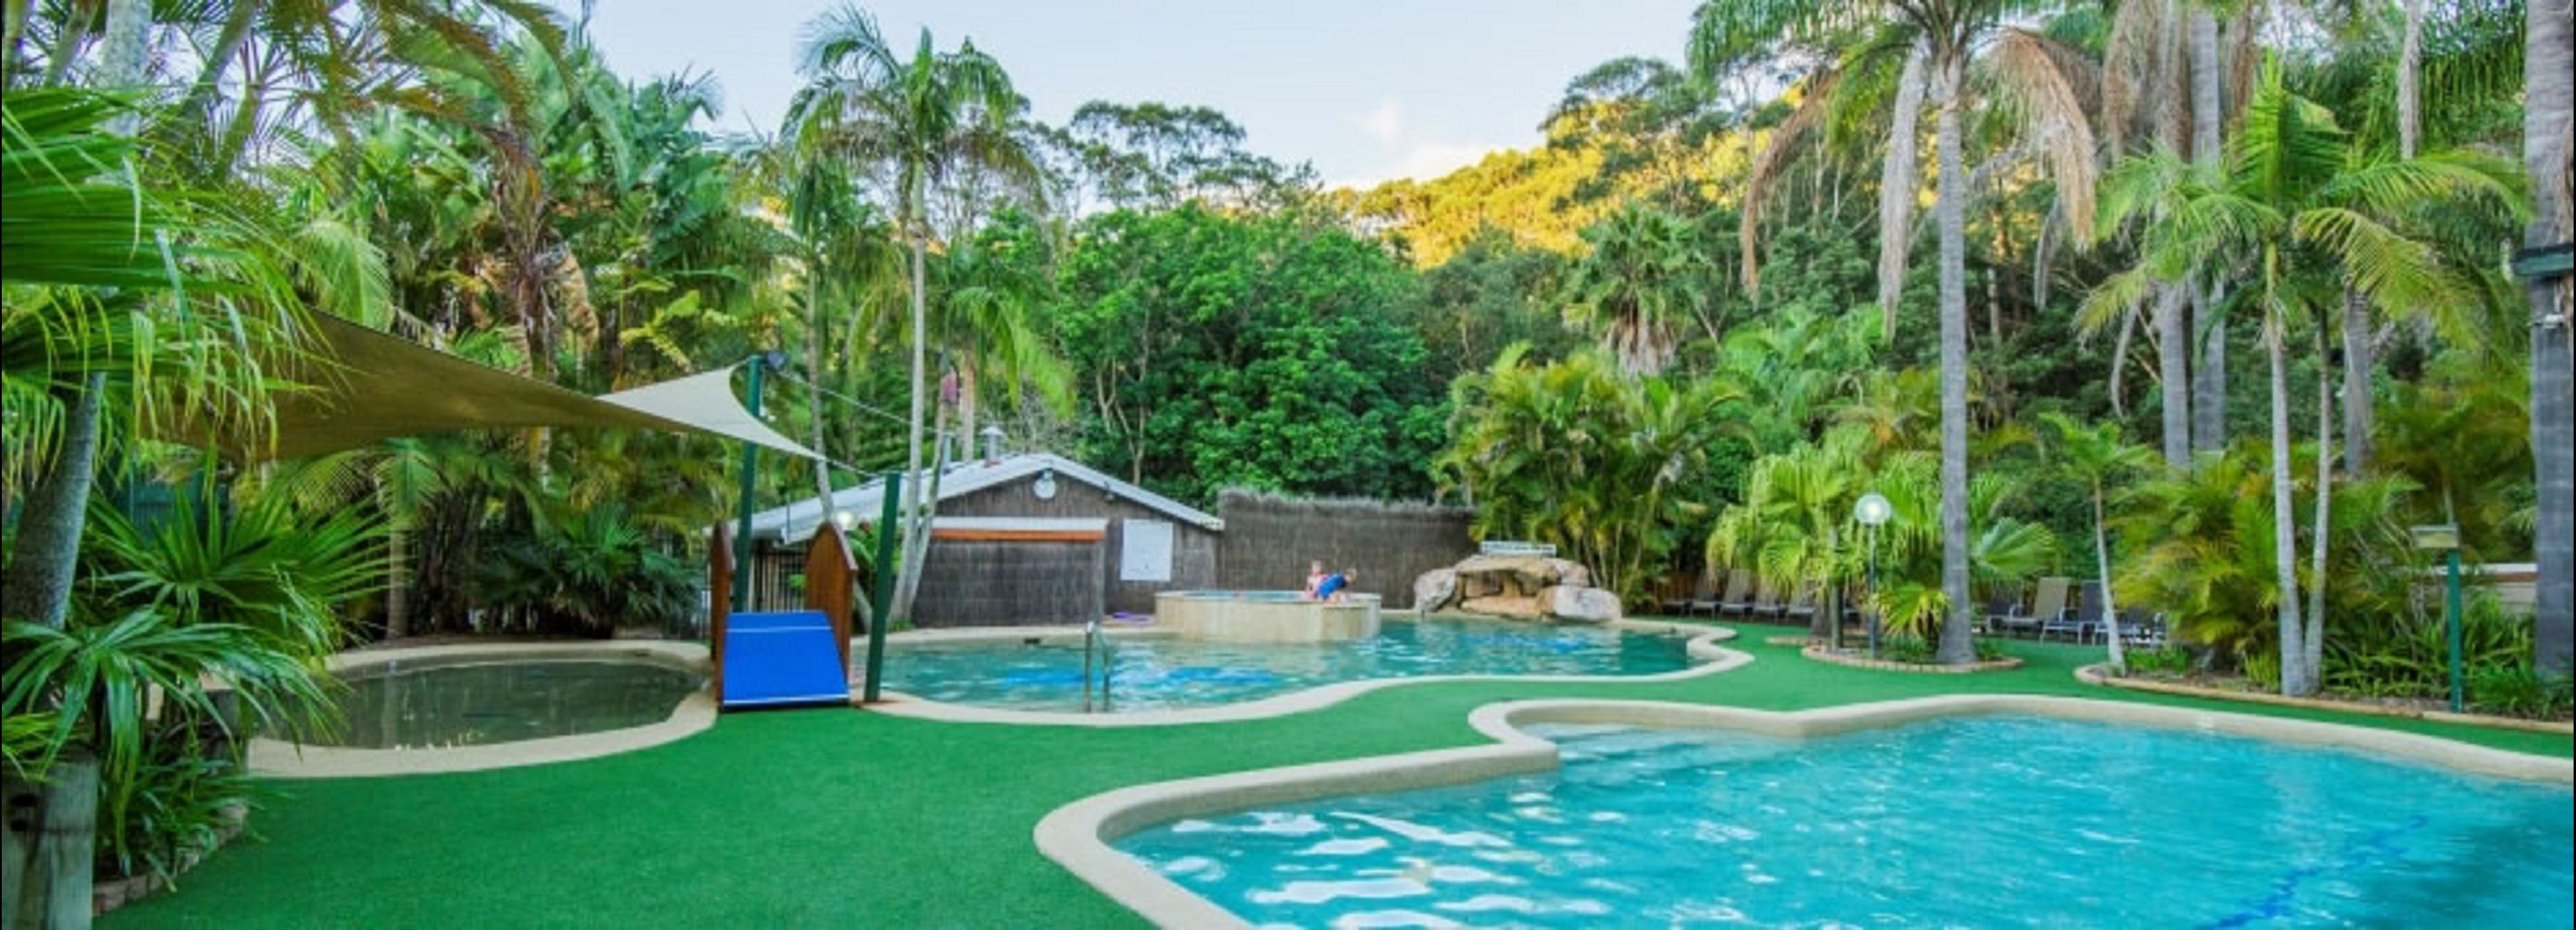 The Palms at Avoca - Accommodation Nelson Bay